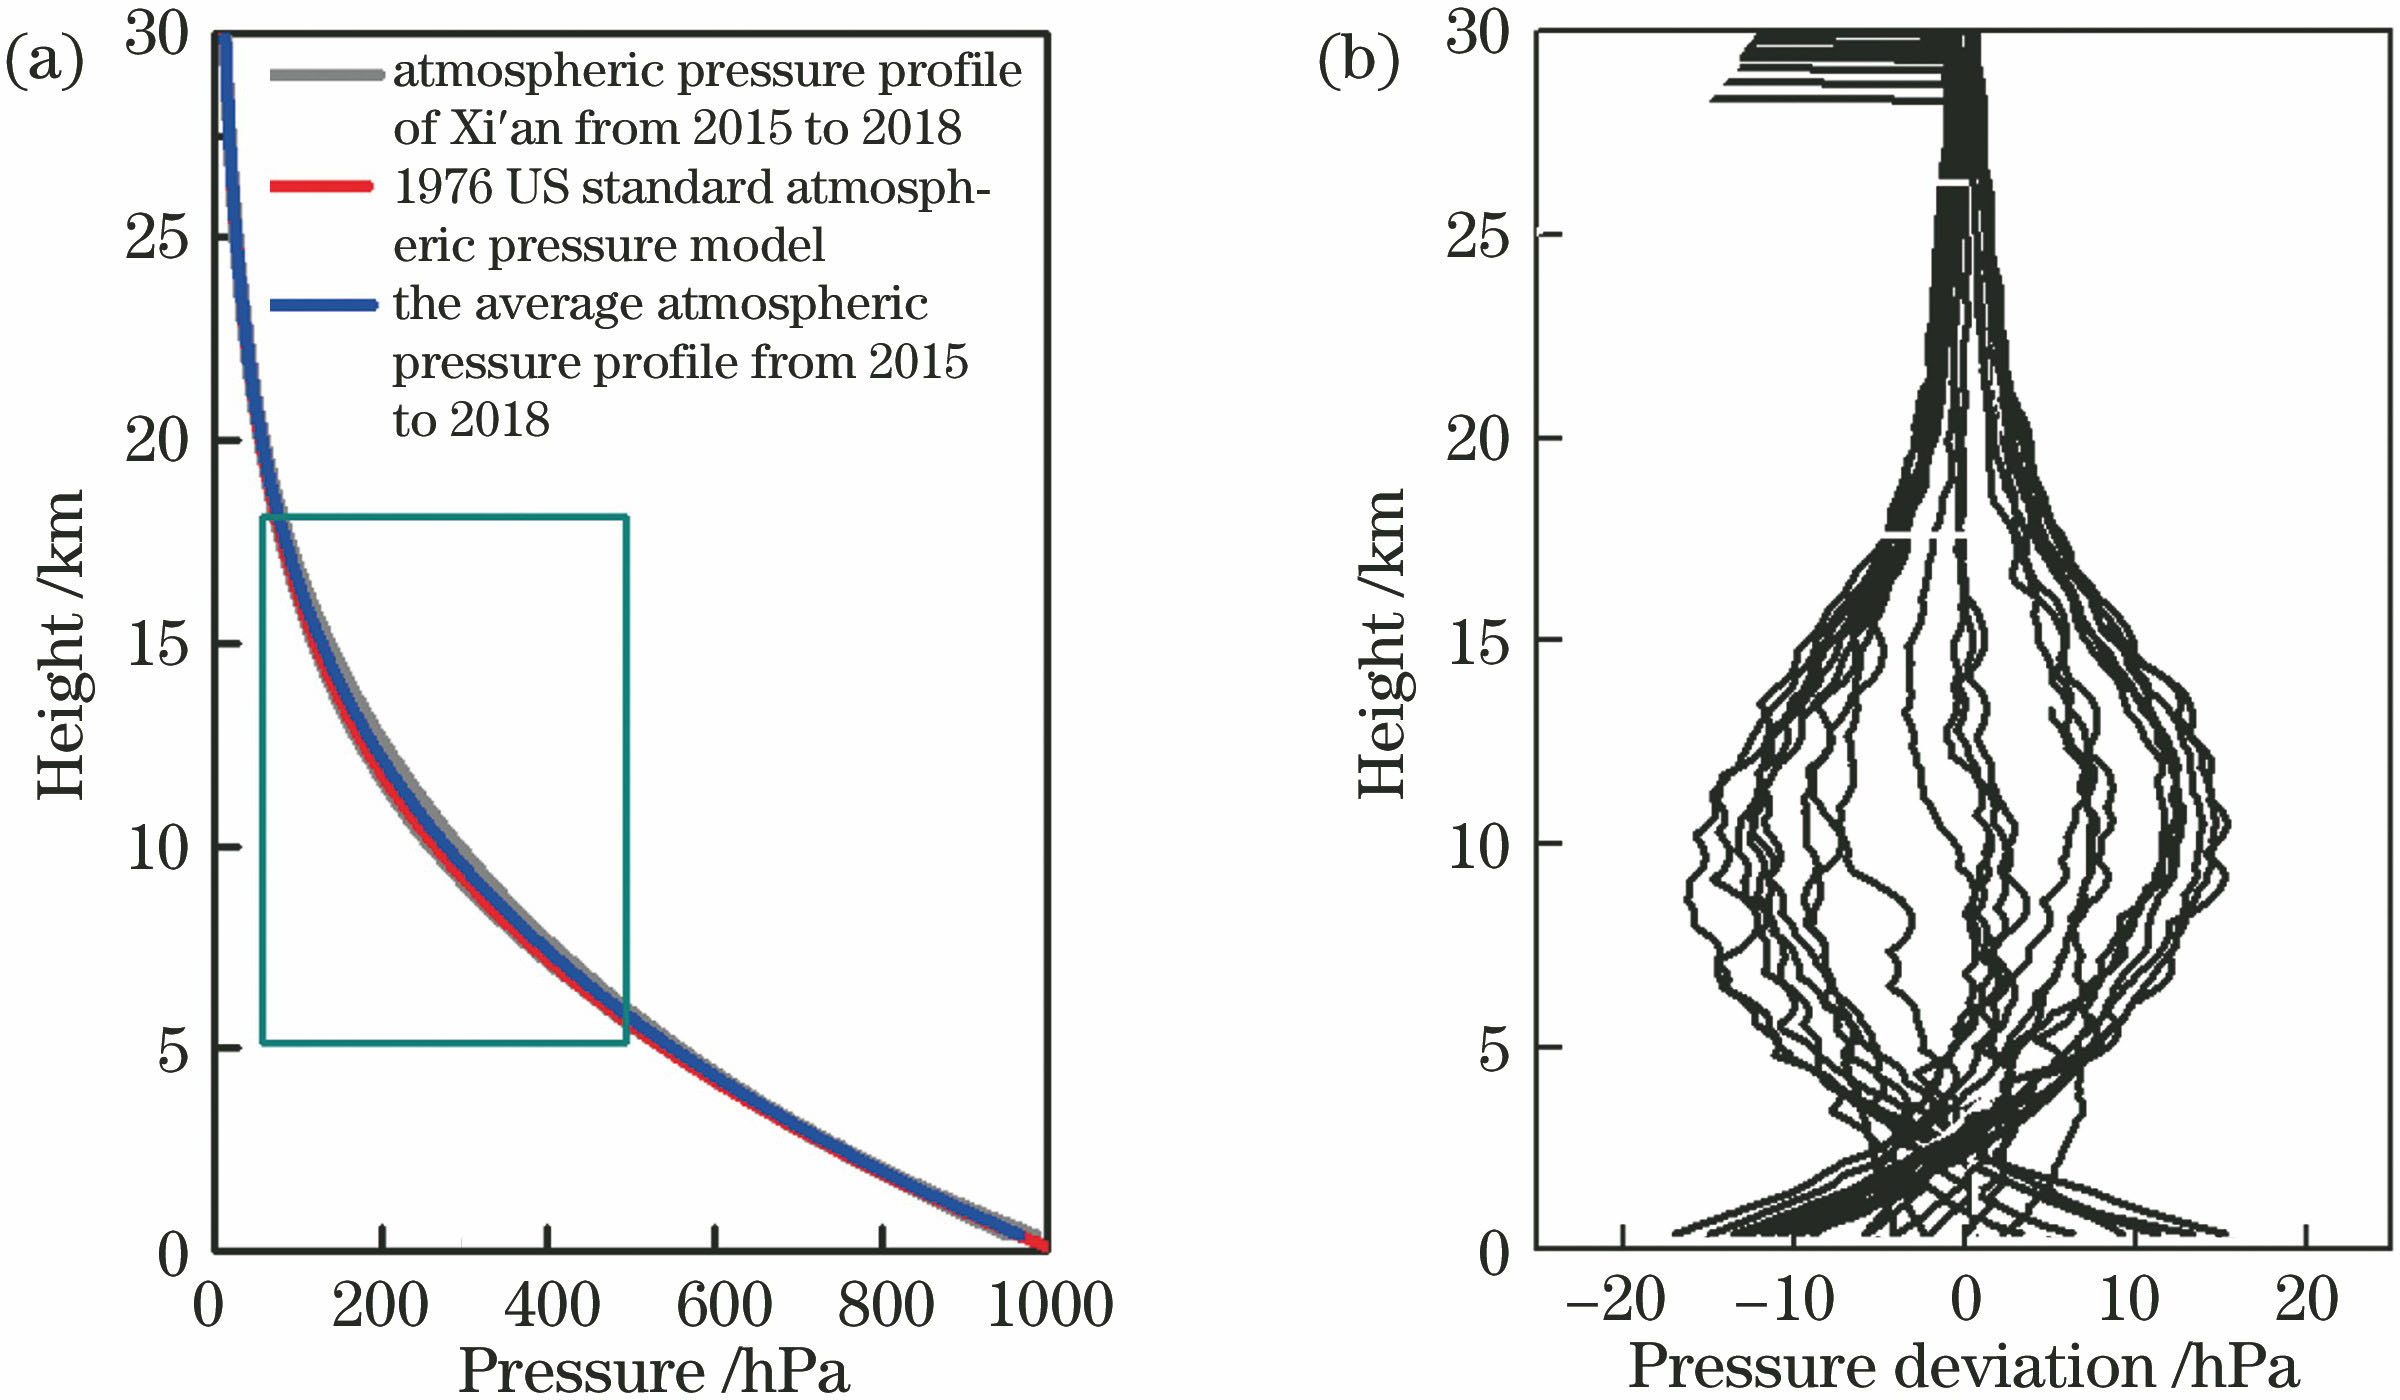 Atmospheric pressure profiles over Xian. (a) 4-year atmospheric pressure profiles from sounding balloon and the 1976 US standard atmospheric pressure model; (b) fluctuation of atmospheric pressure with height